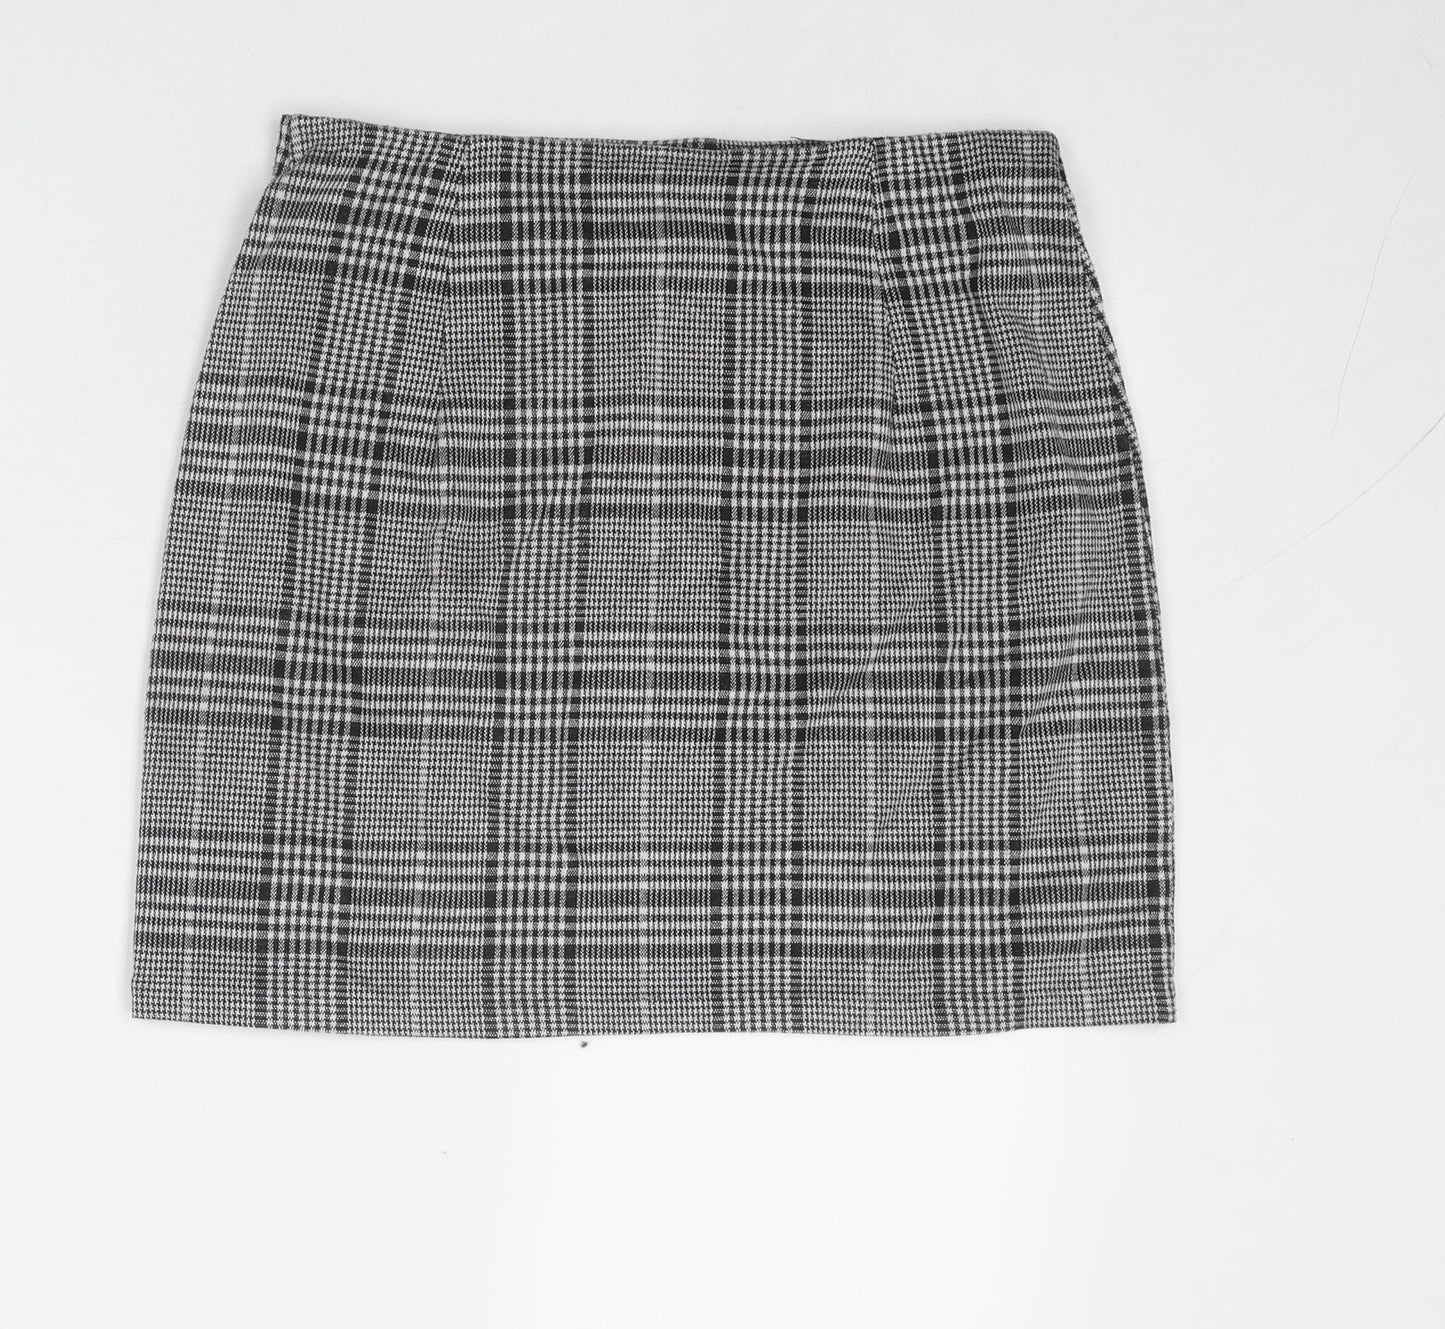 Divided by H&M Womens Black Plaid Polyester A-Line Skirt Size M